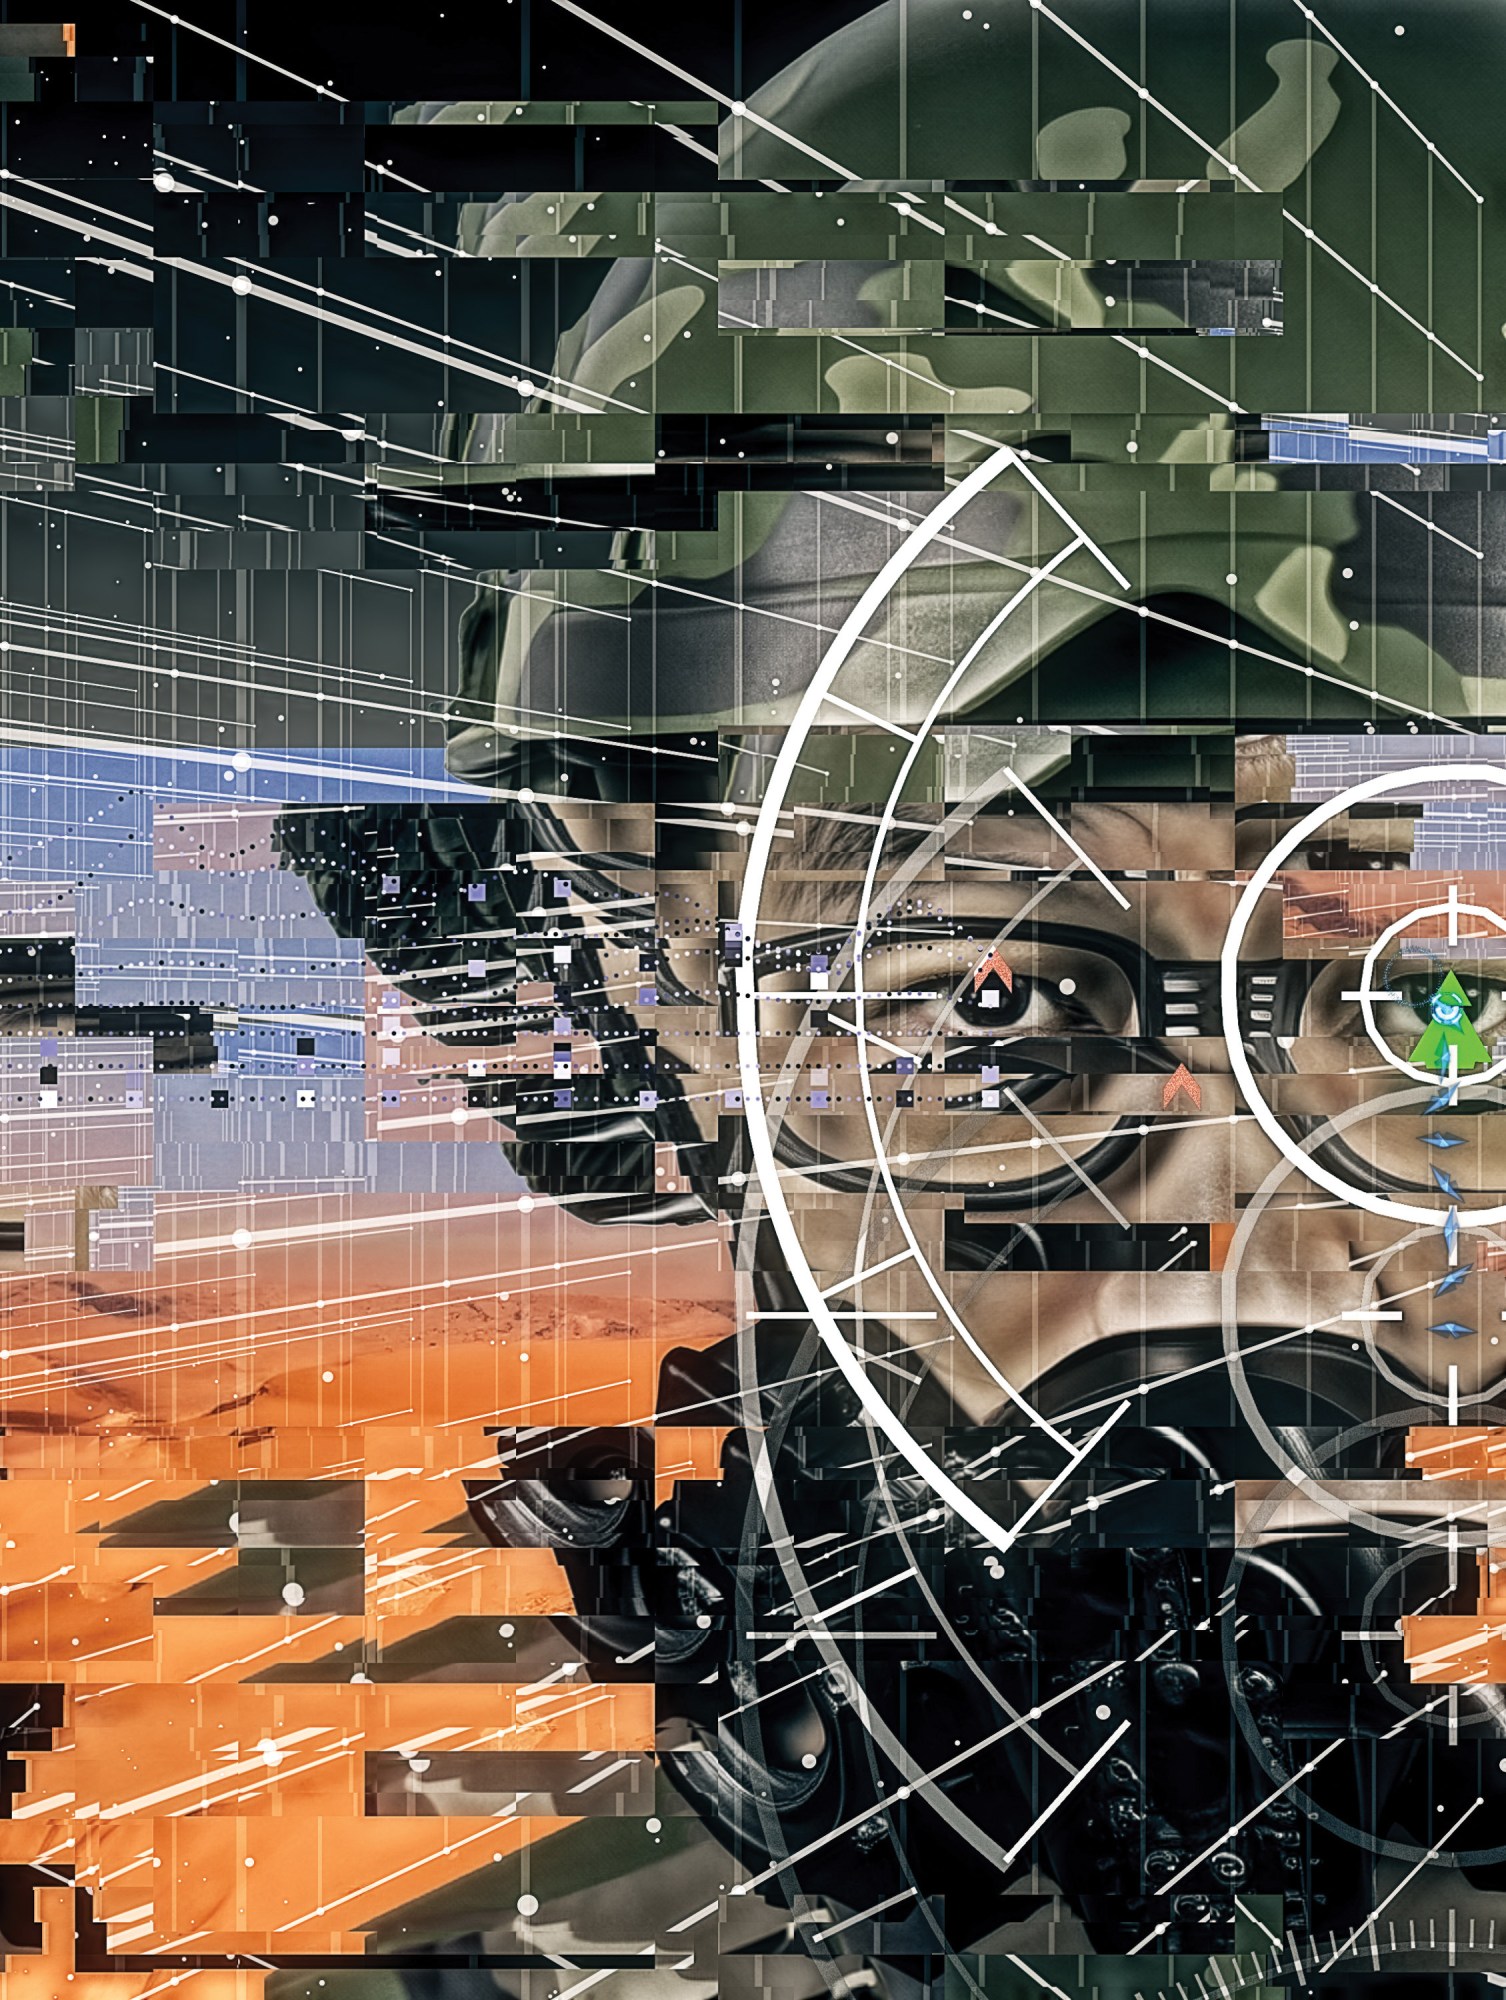 glitch aesthetic of a soldier's face